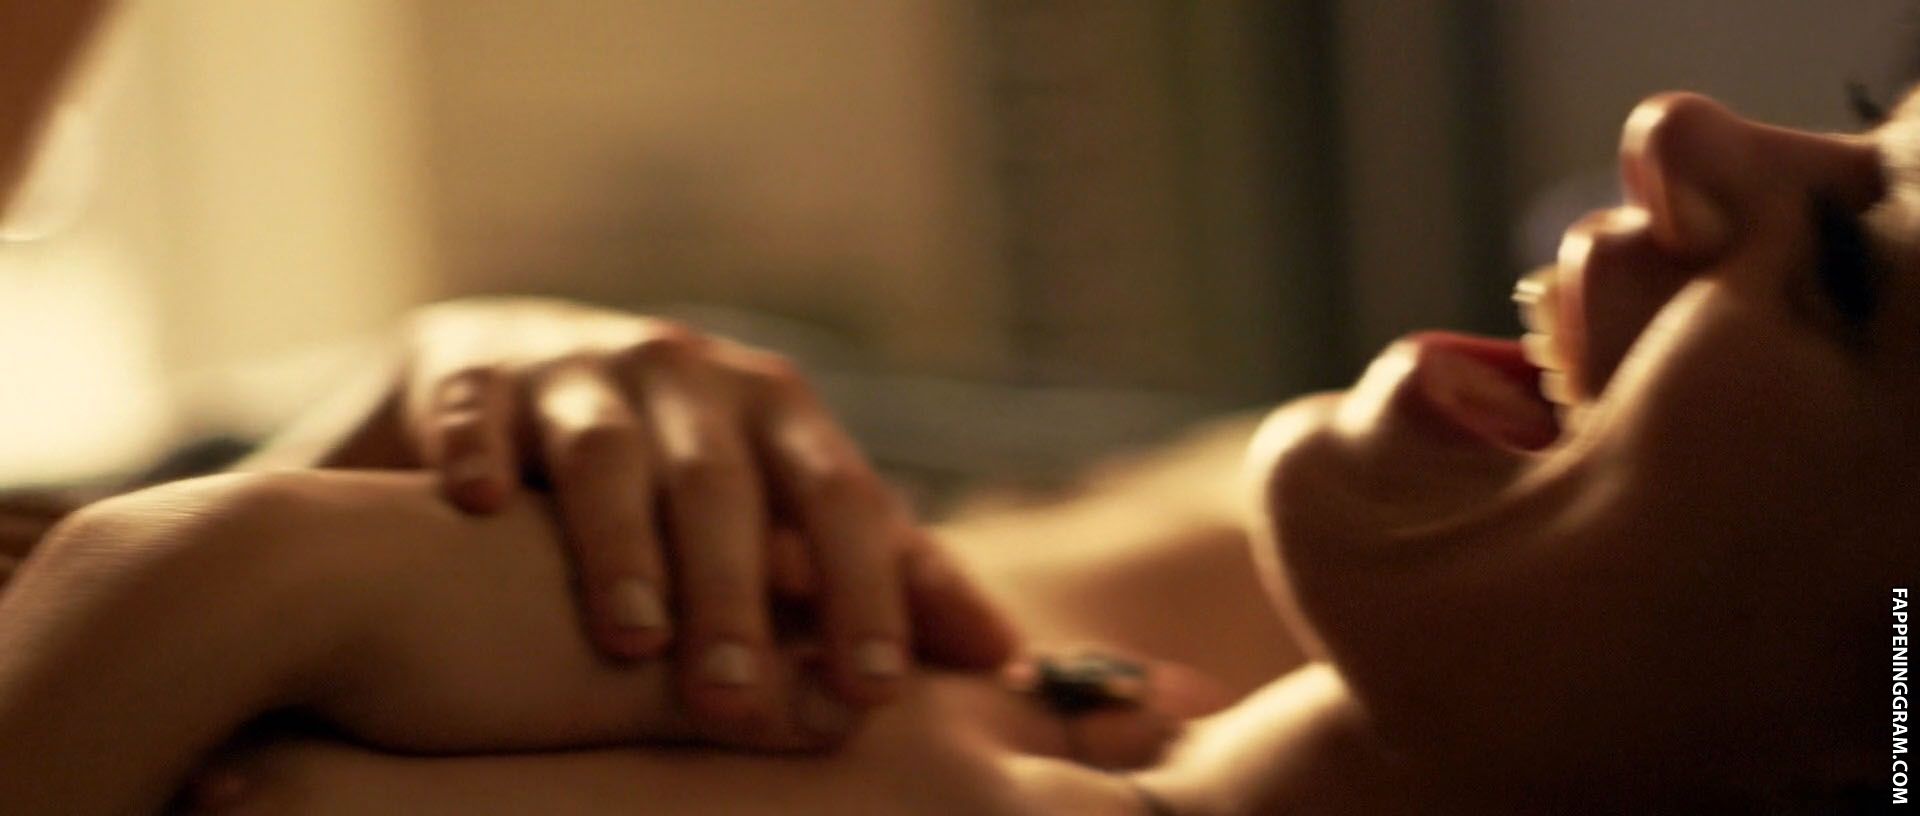 Tape sex lindsey shaw Lindsey shaw